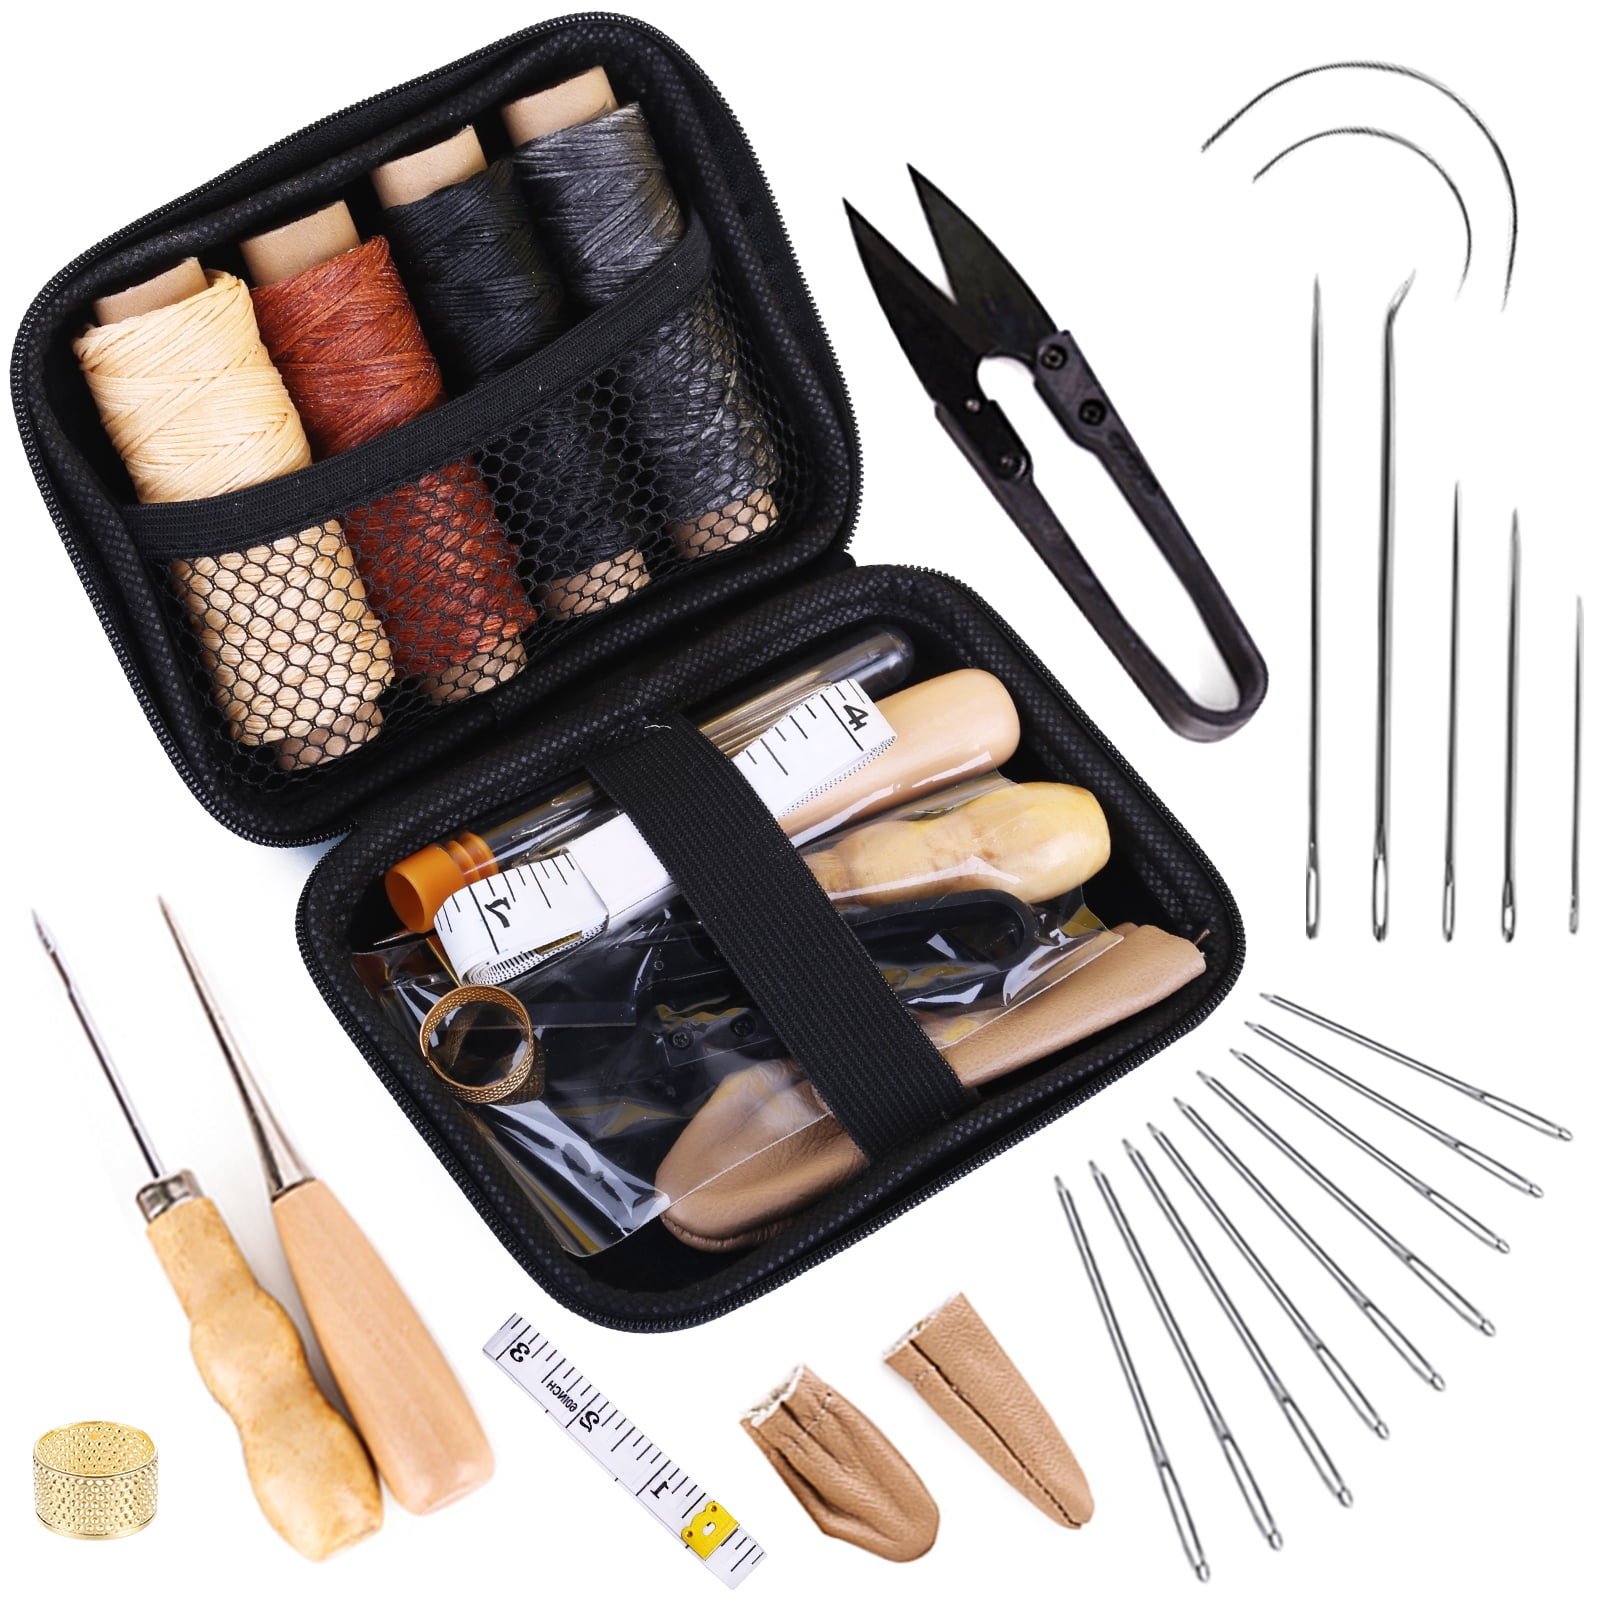 Jupean Leather Sewing Kits for Beginners and Professionals，28 PCS